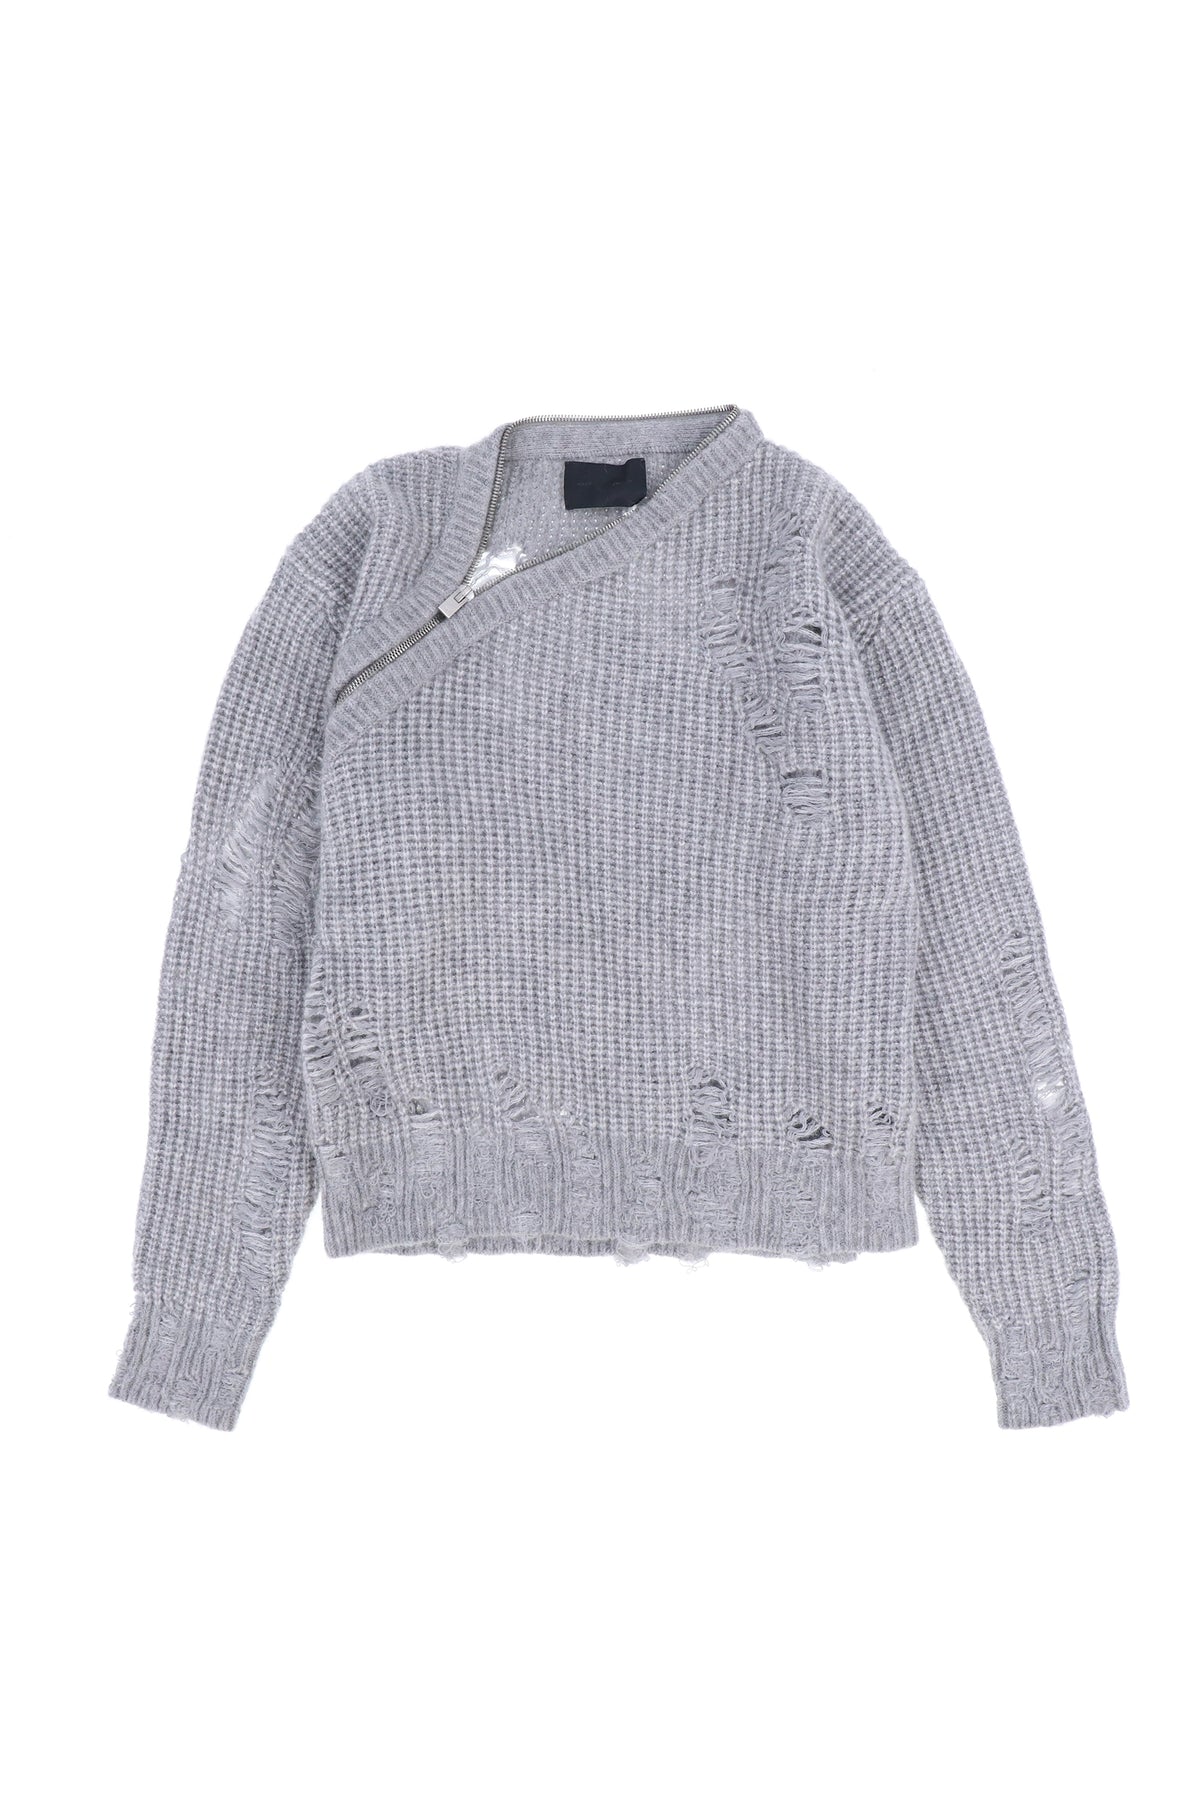 CONVEX DISTRESSED KNIT / GRY